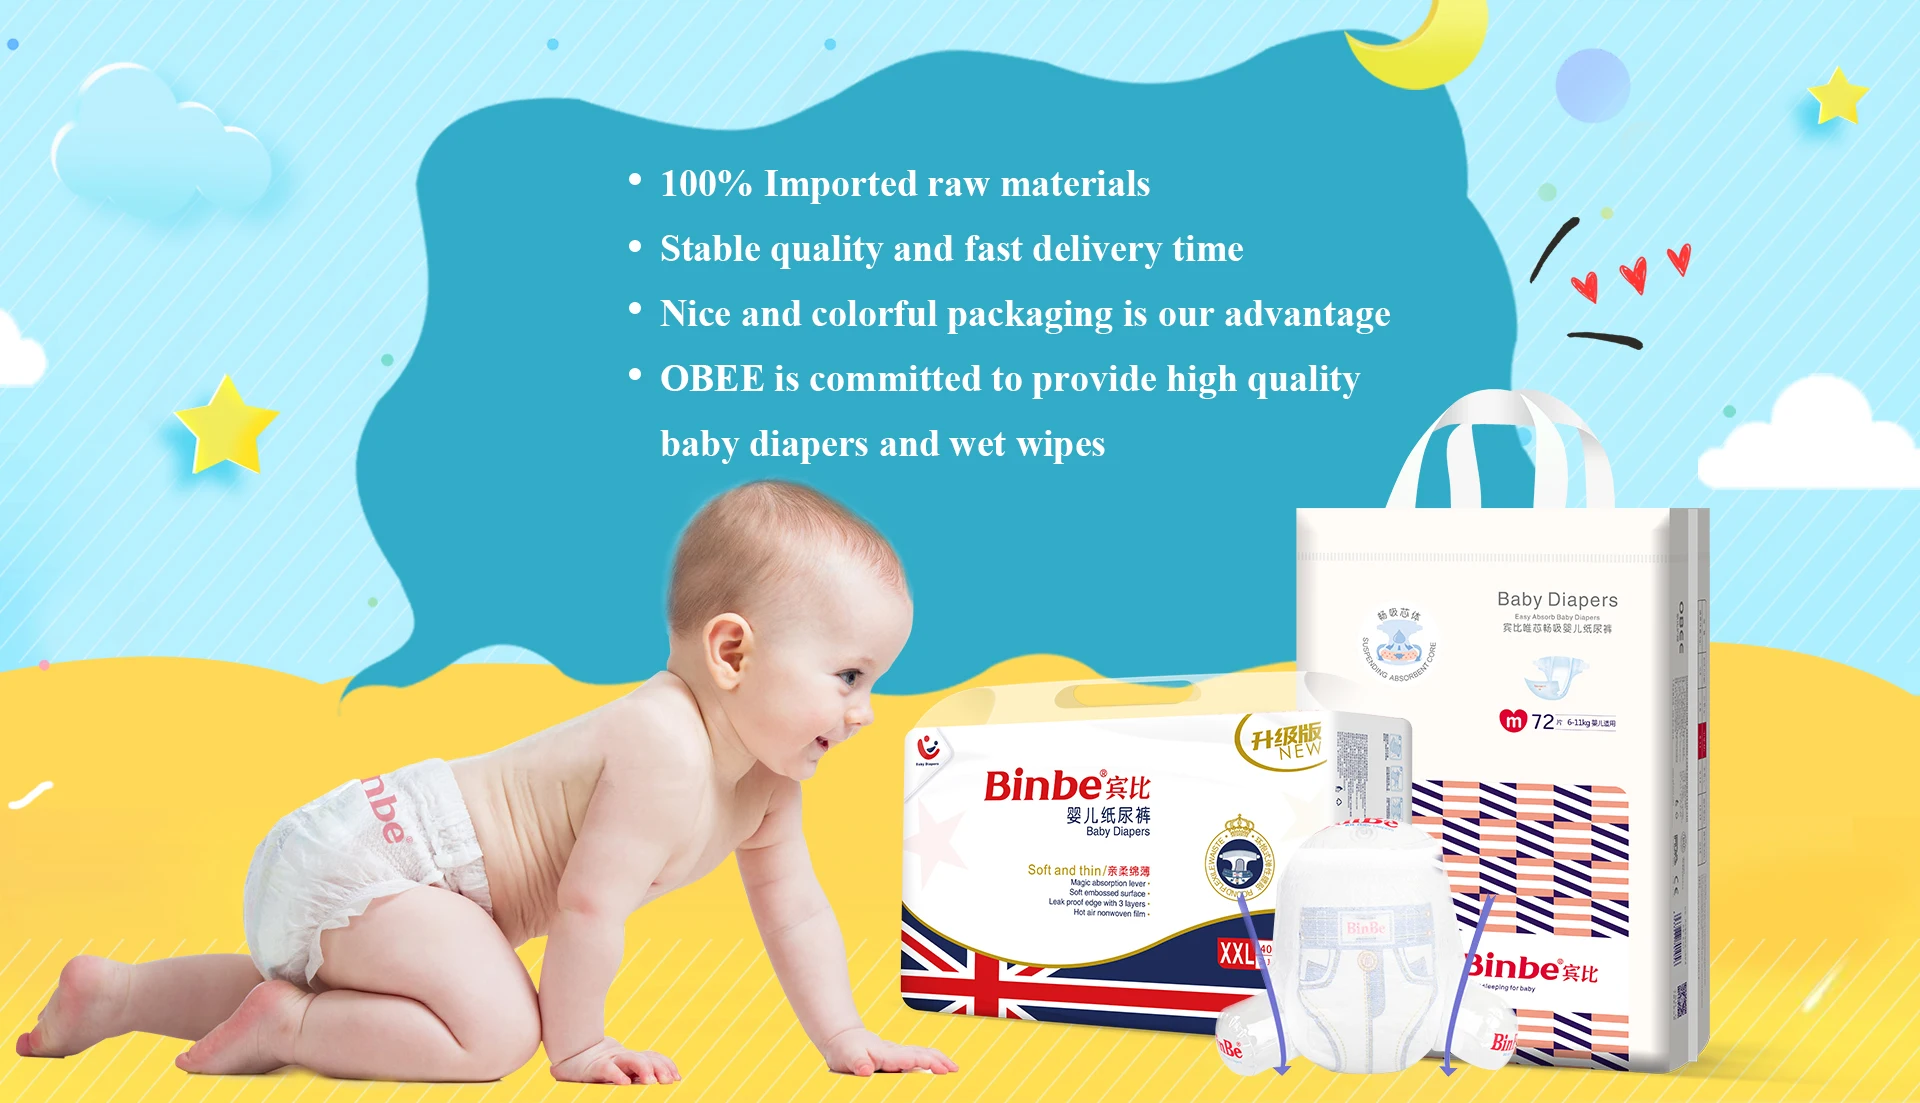 Large Size Disposable Teen Baby Diapers For Boys And Girls Ship To ...